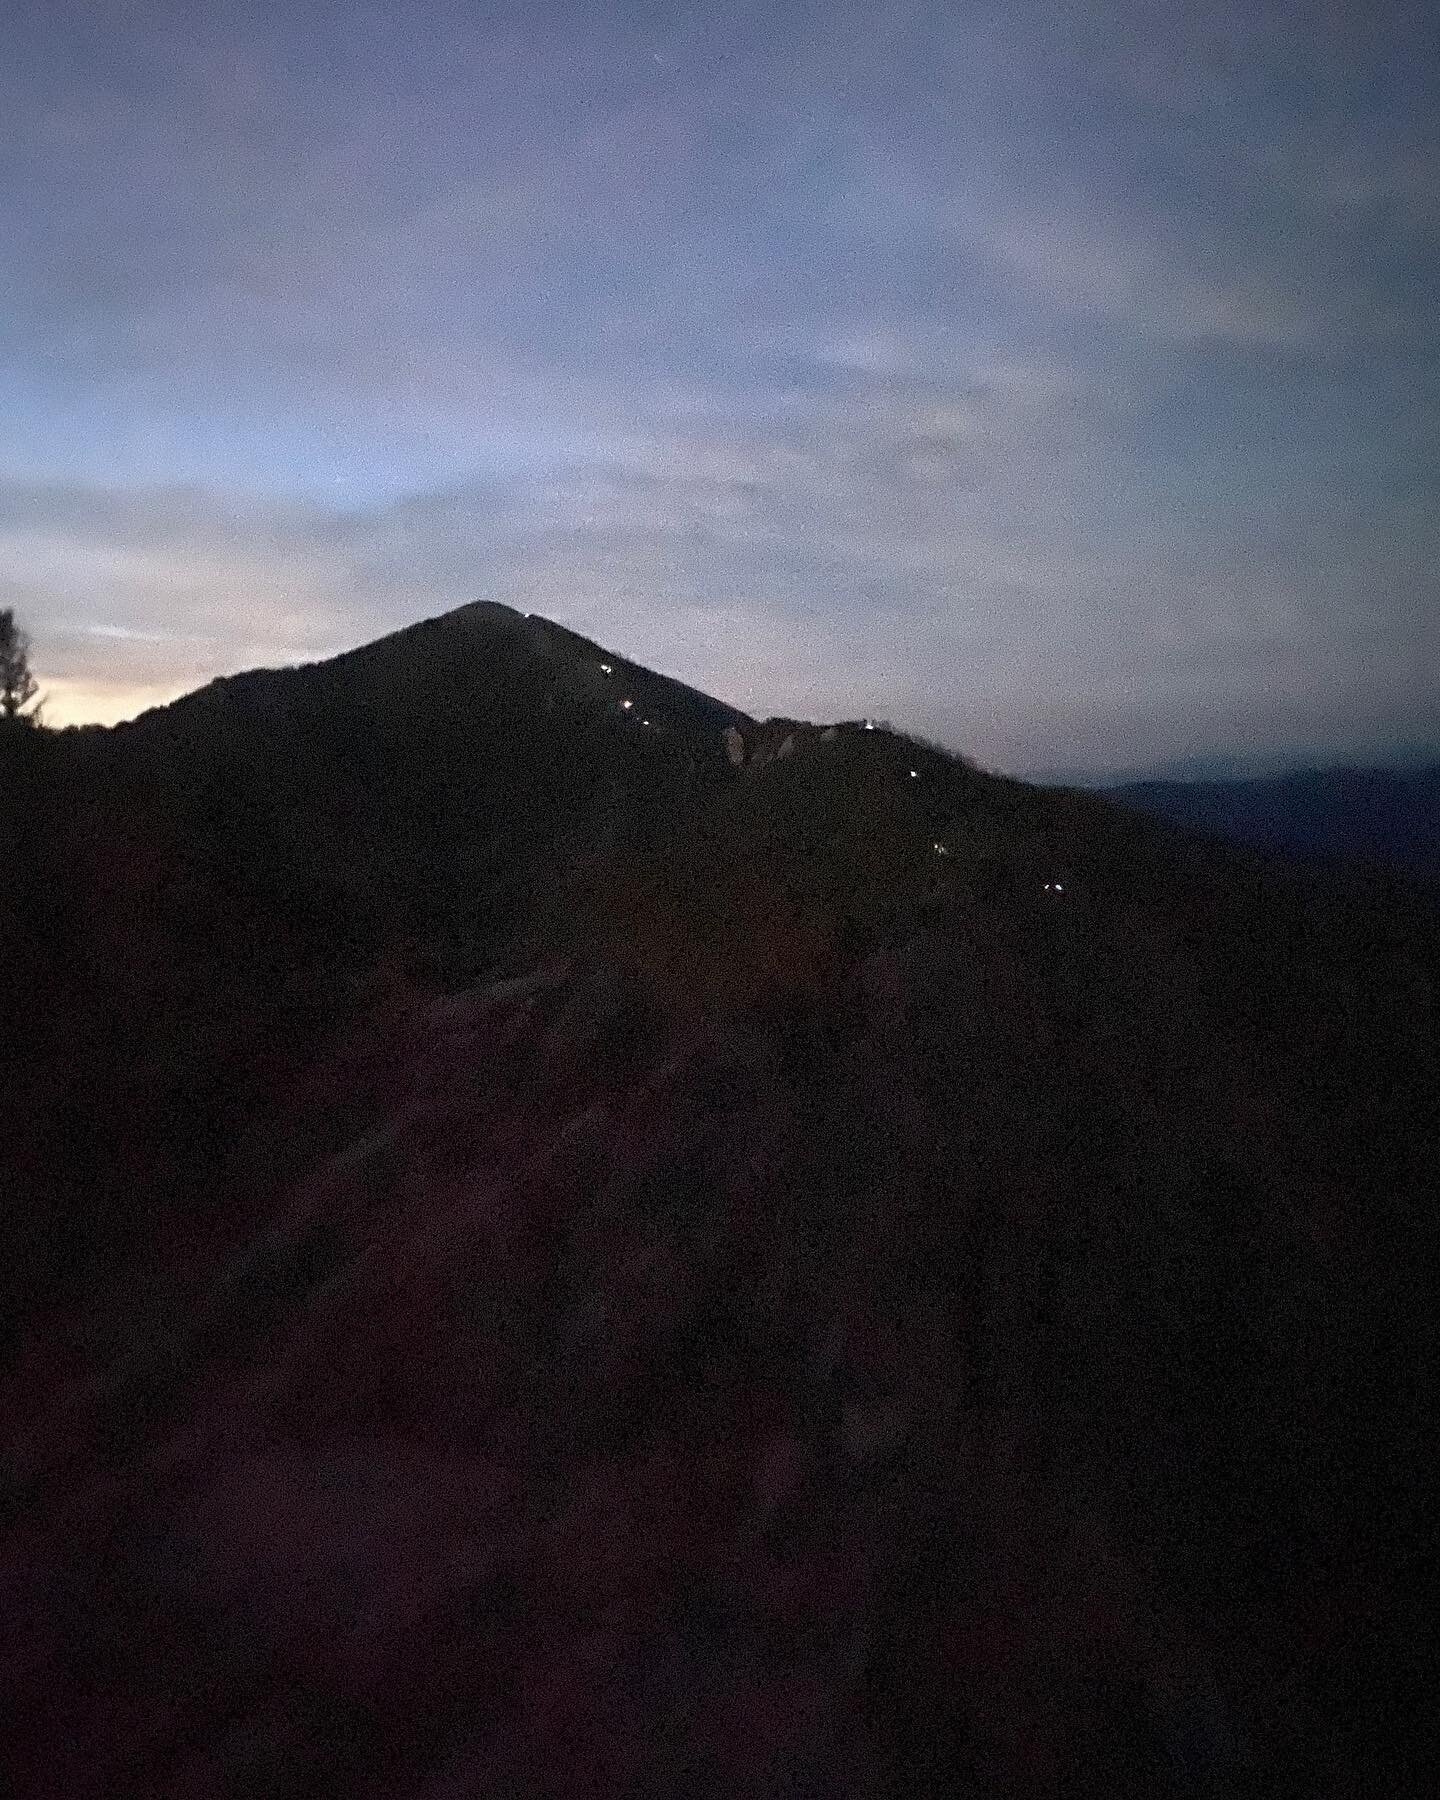 Headlamps heading up to Baldy Peak for last nights Full Moon run 😍🙌 so cool. Thanks to all who came out, and @thefreeoutside for leading the crew.

Next up, Mount Blackmore with @ejbrew 

📸 @thefreeoutside 

#bozemanrunclub #baldypeak #bozeman #bo